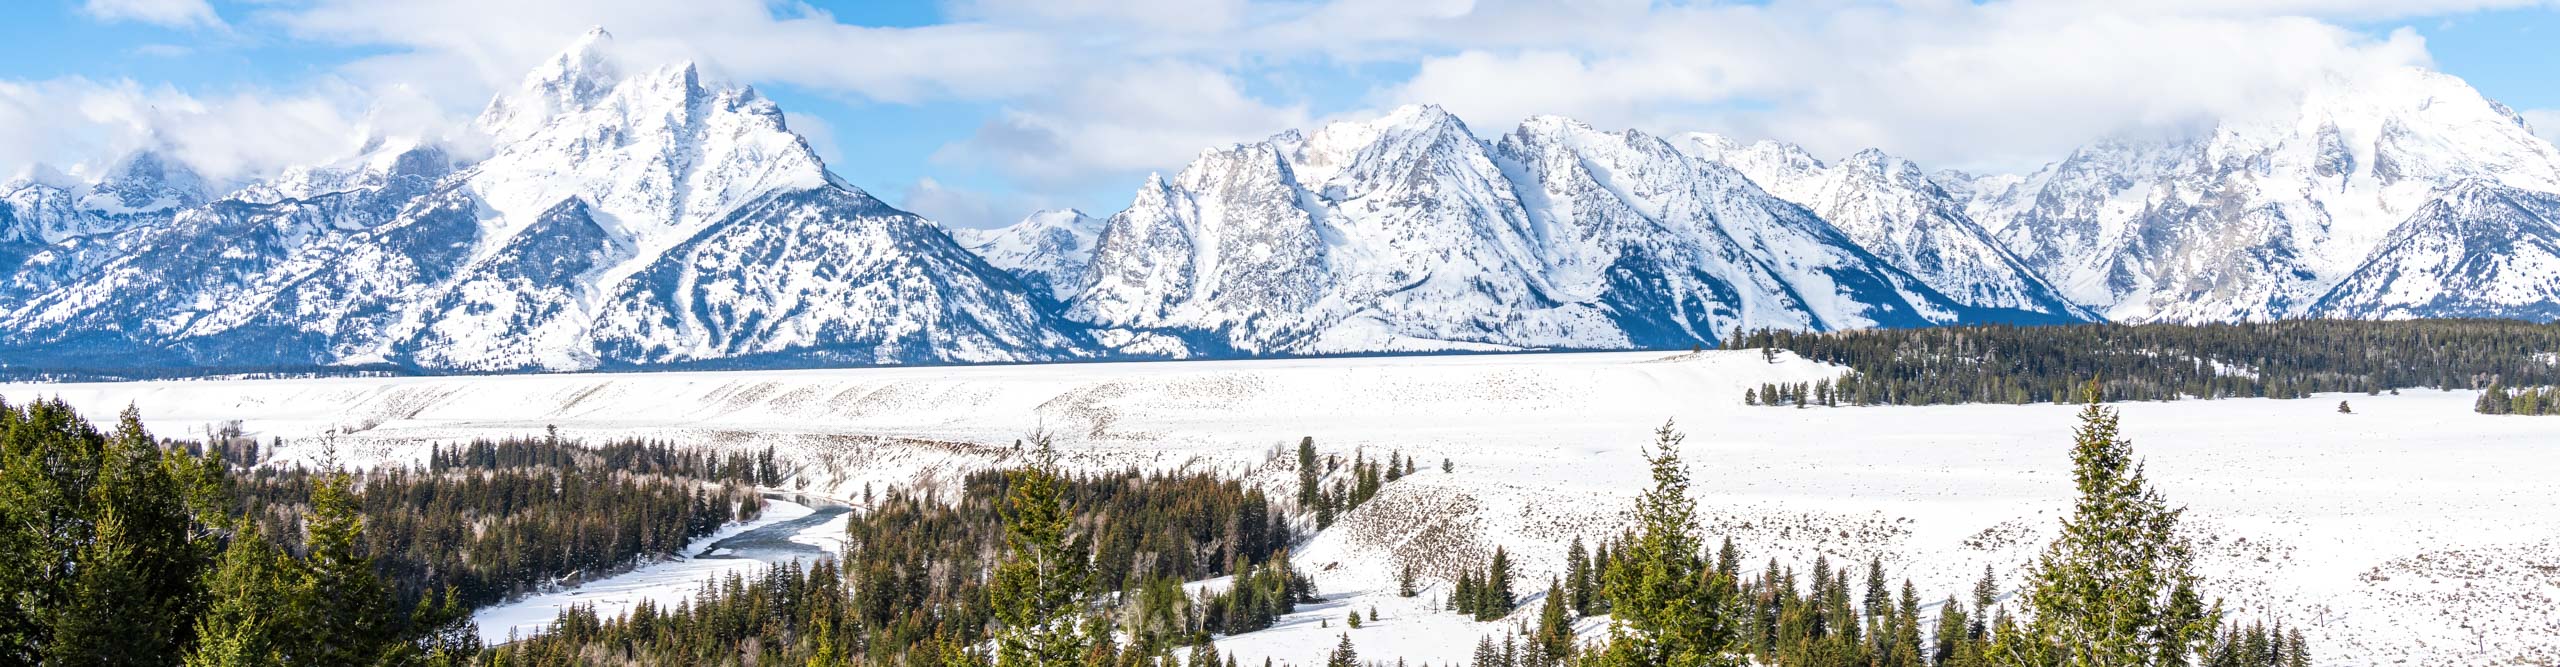 Snow ont he Mountains at snake river Yellowstone national park 